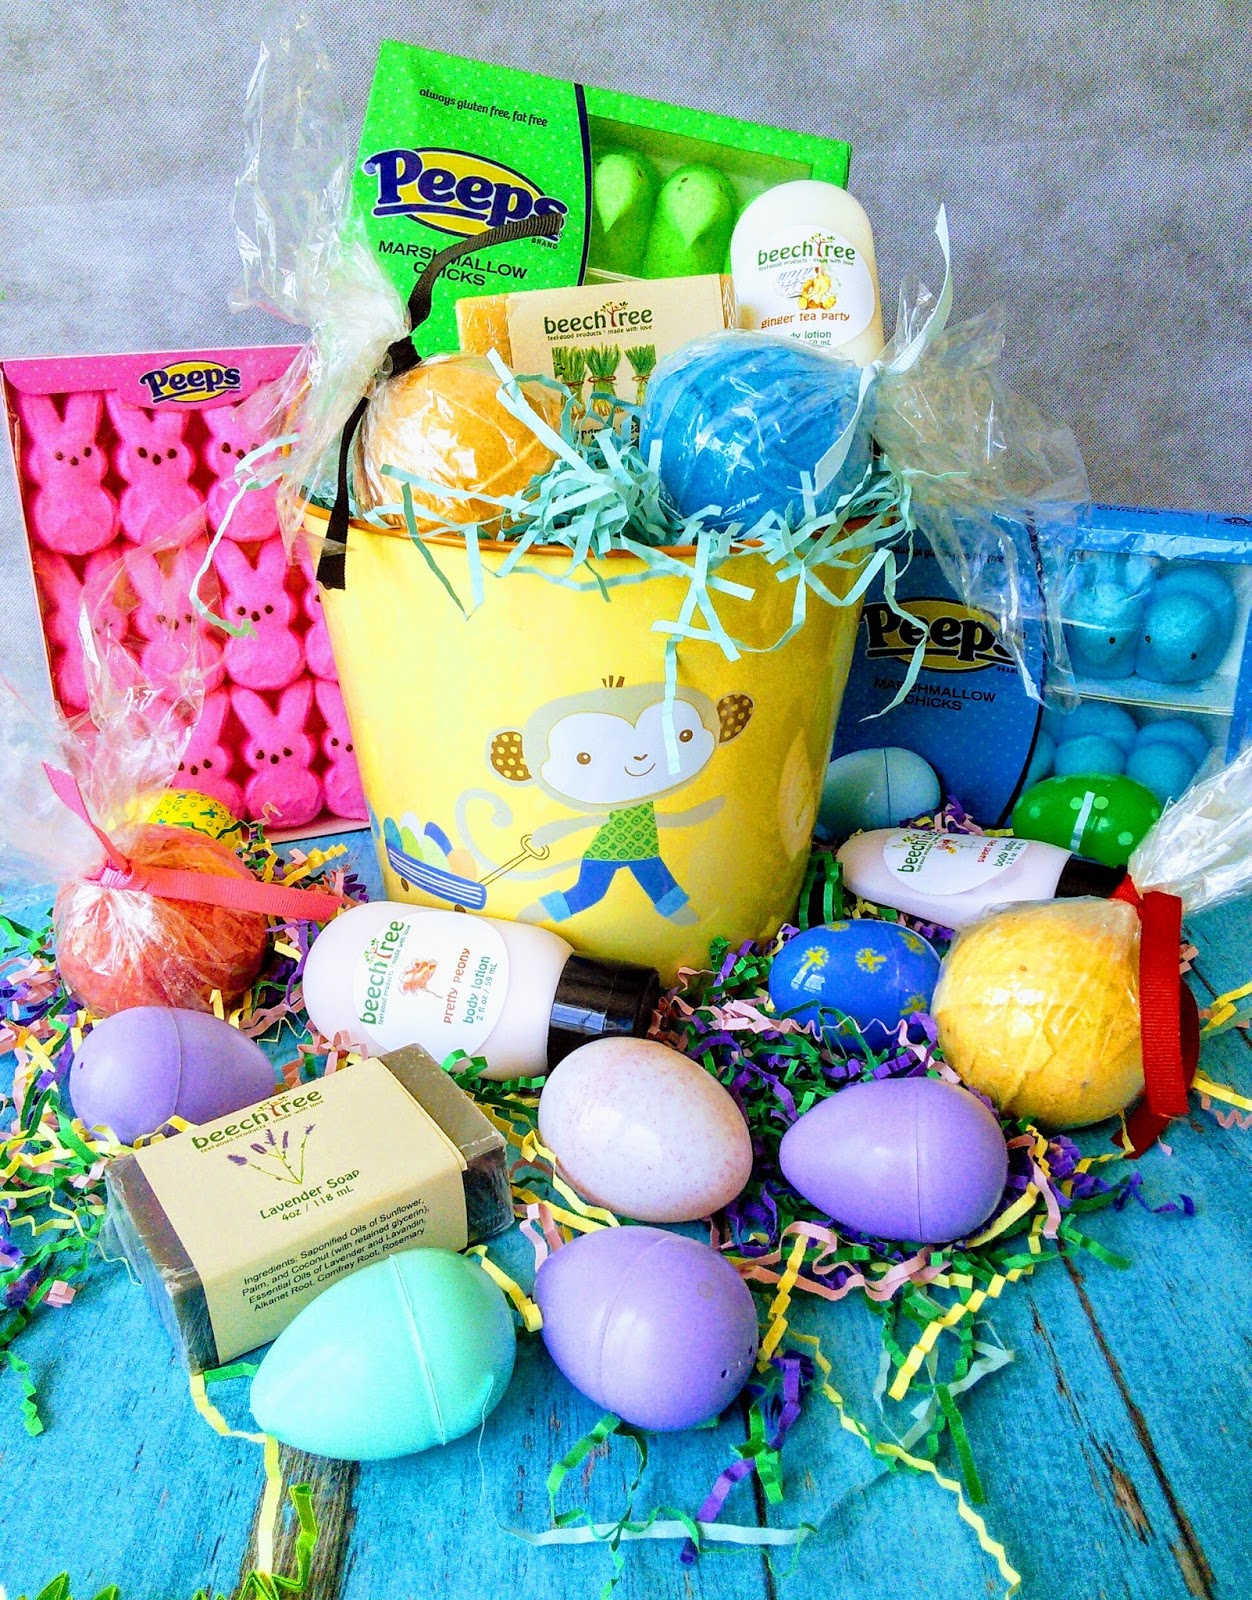 Check Out Some Idea For Easter Baskets